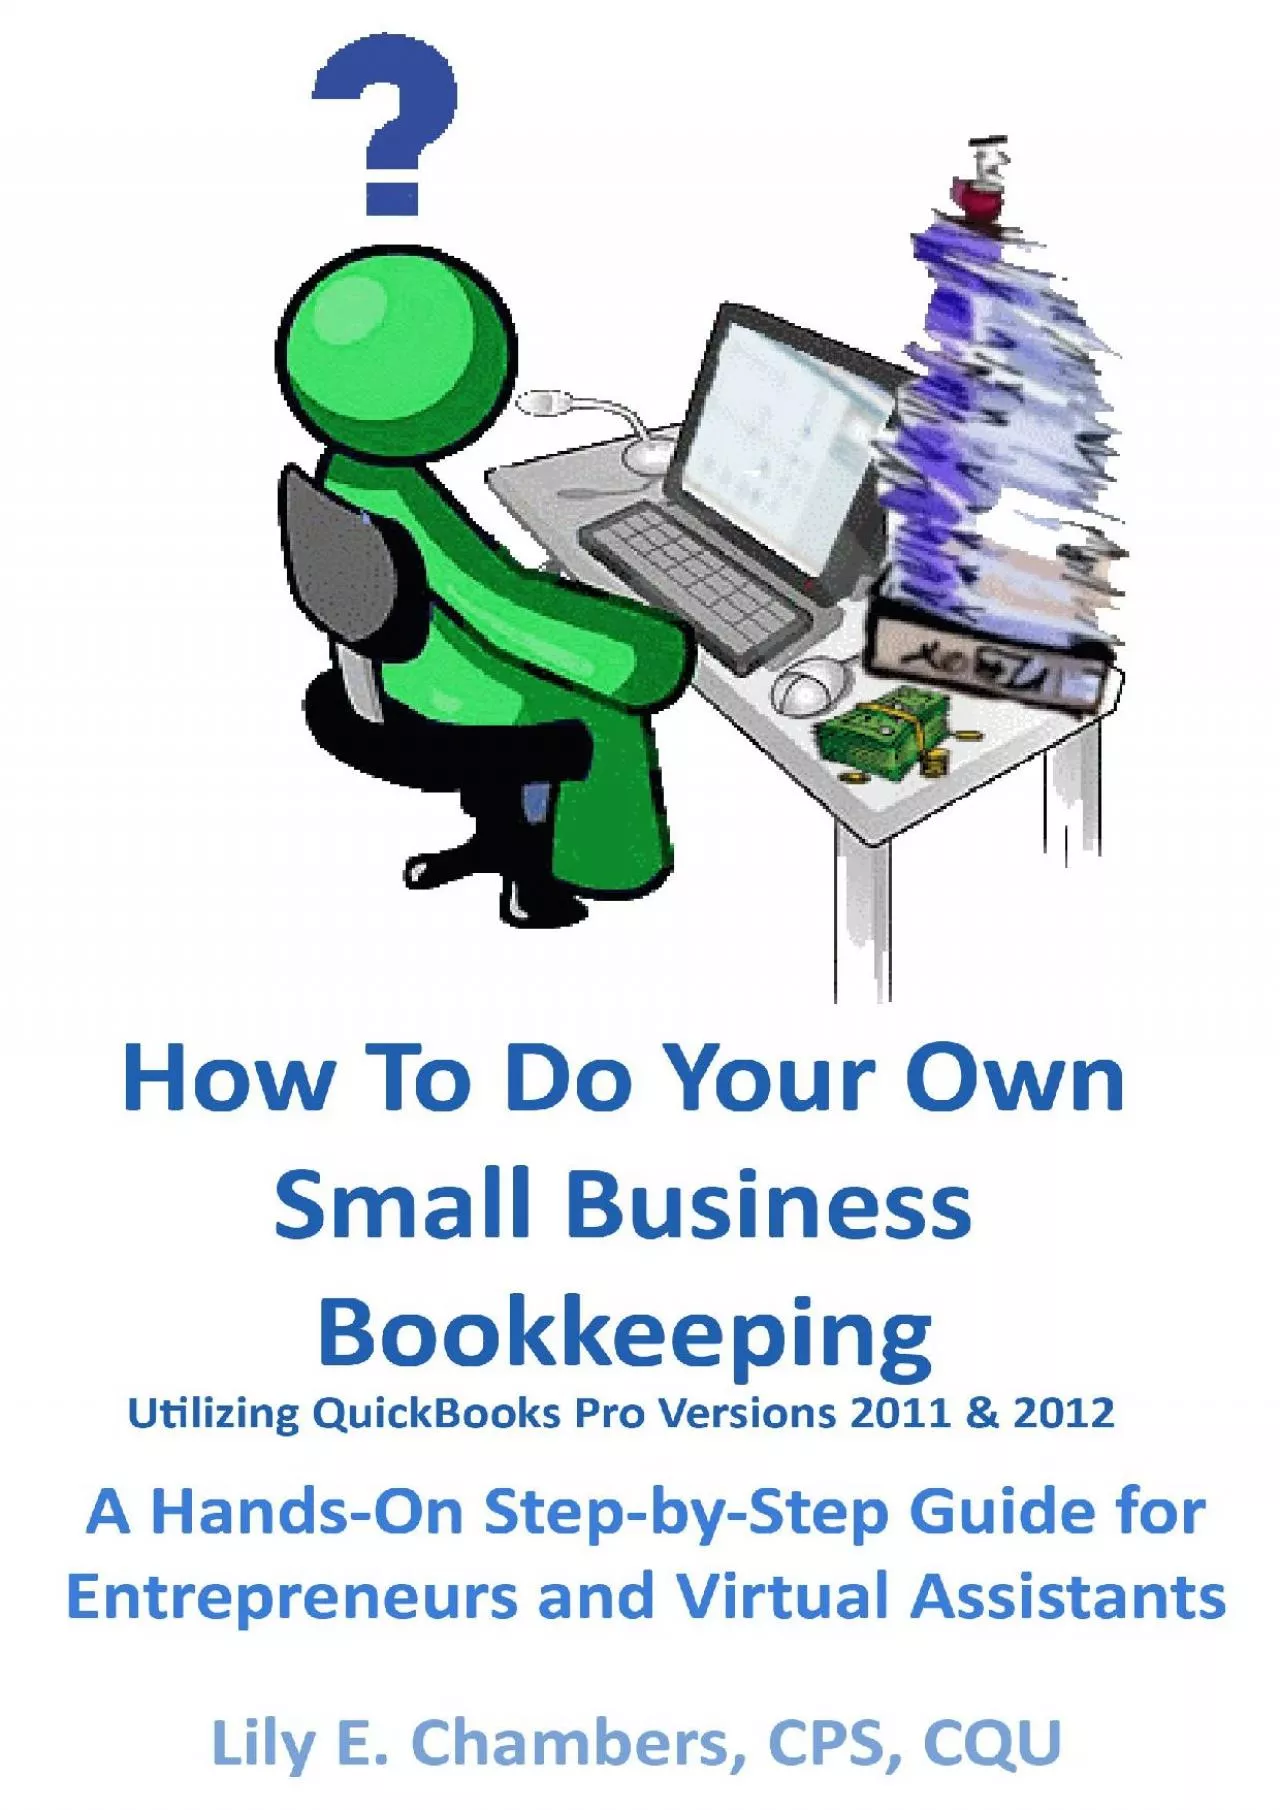 (EBOOK)-How To Do Your Own Small Business Bookkeeping utilizing QuickBooks Versions 2011